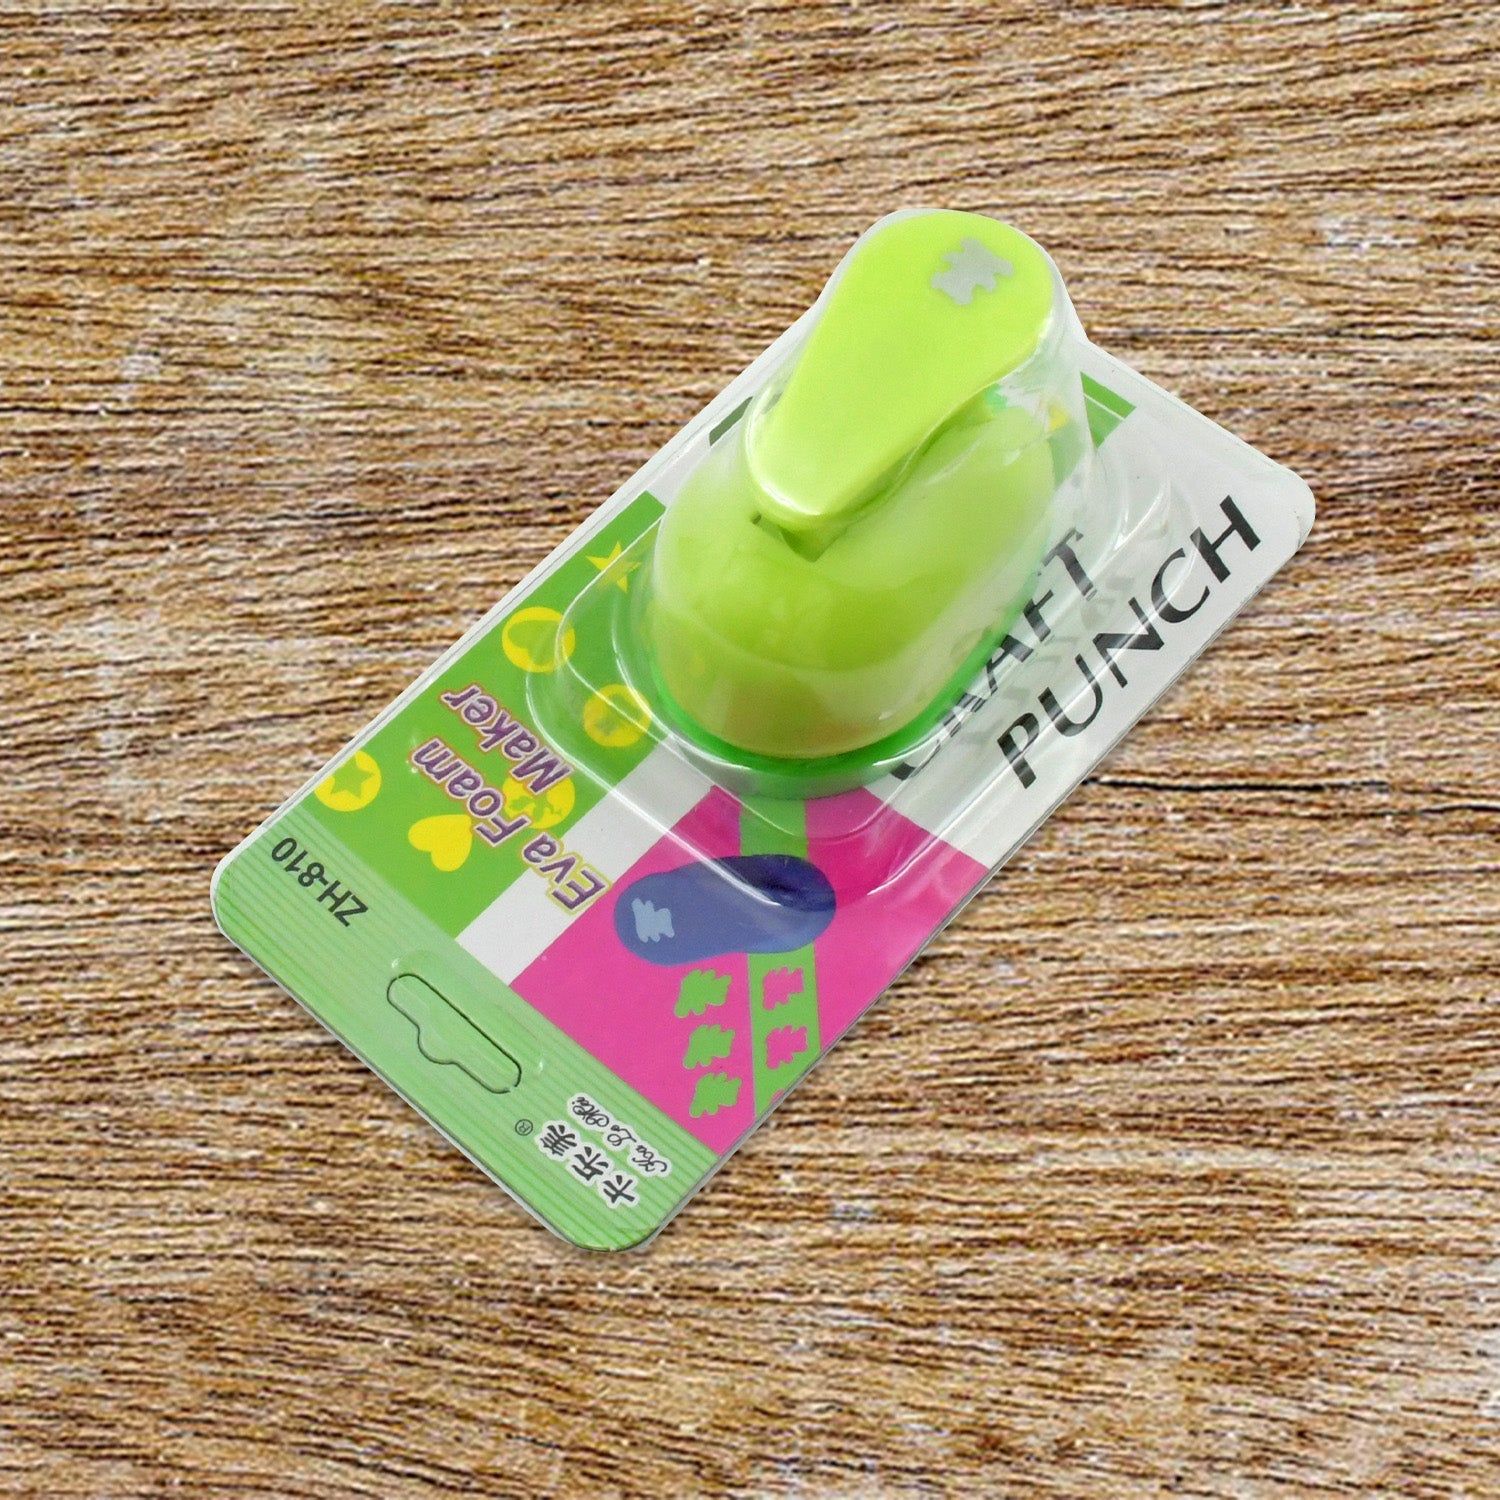 4561 Hole Punch, Kids Paper Craft Punches Decorative, Hole Puncher for Crafting  Scrapbook Nail Designs, for Kids Adults at Rs 63.00